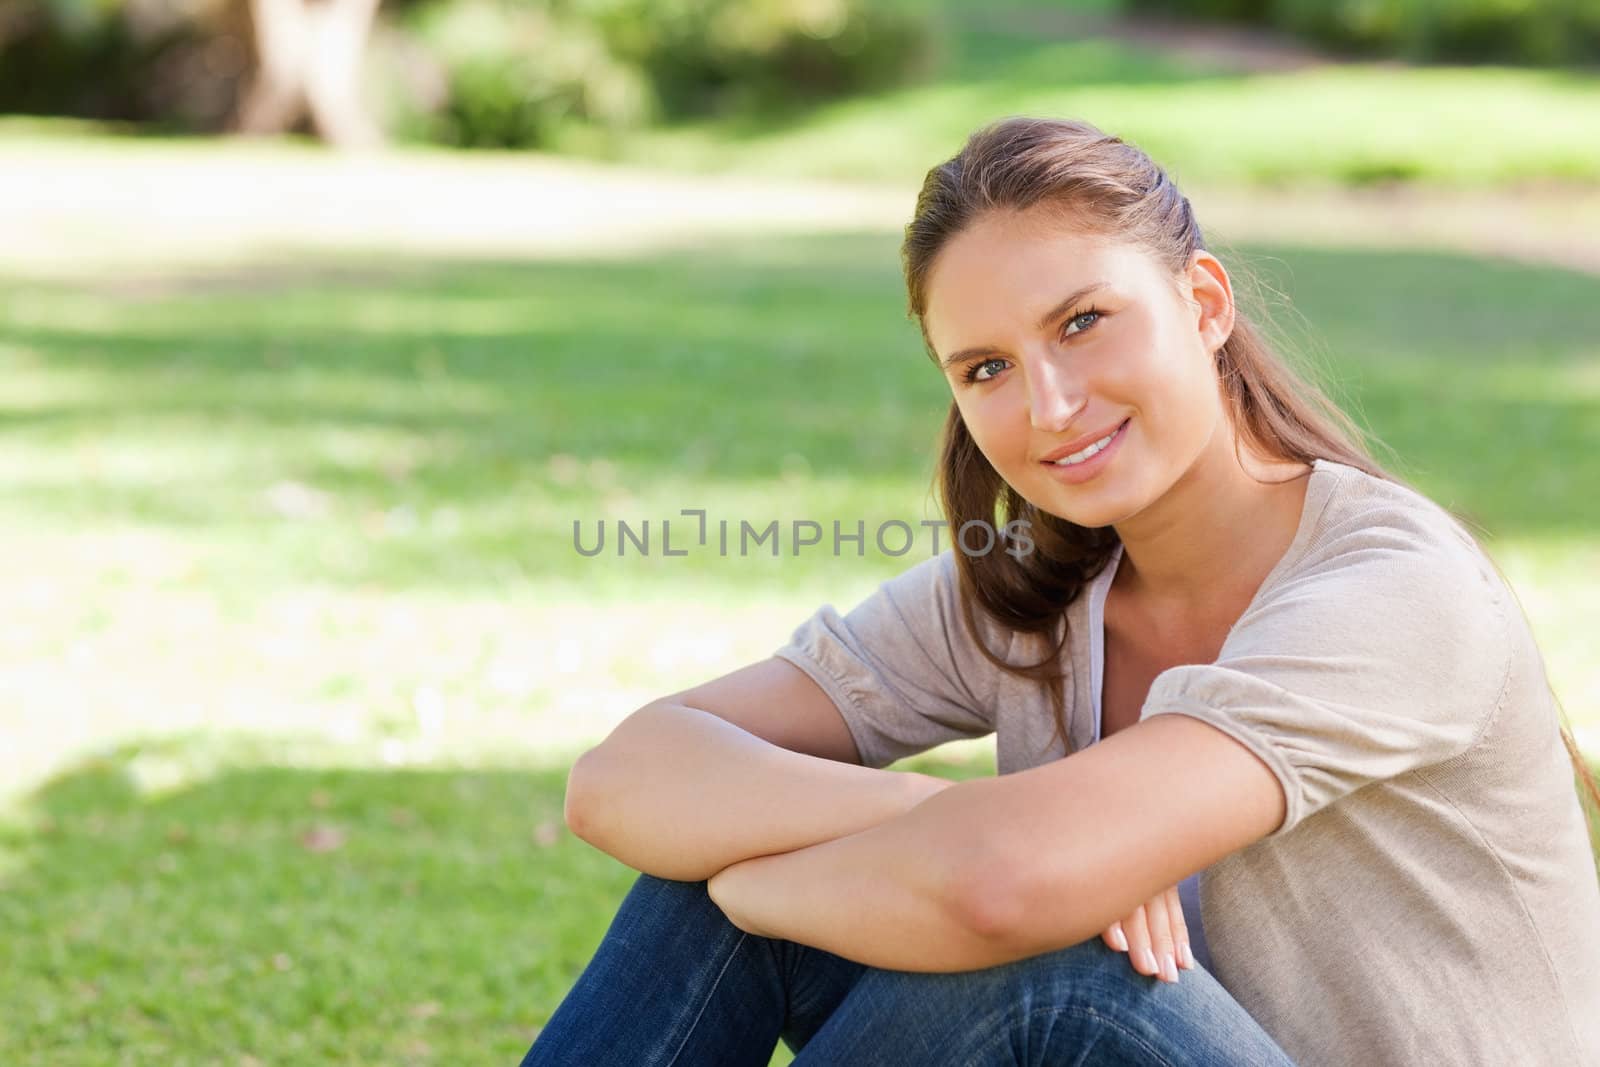 Smiling woman relaxing in the park by Wavebreakmedia